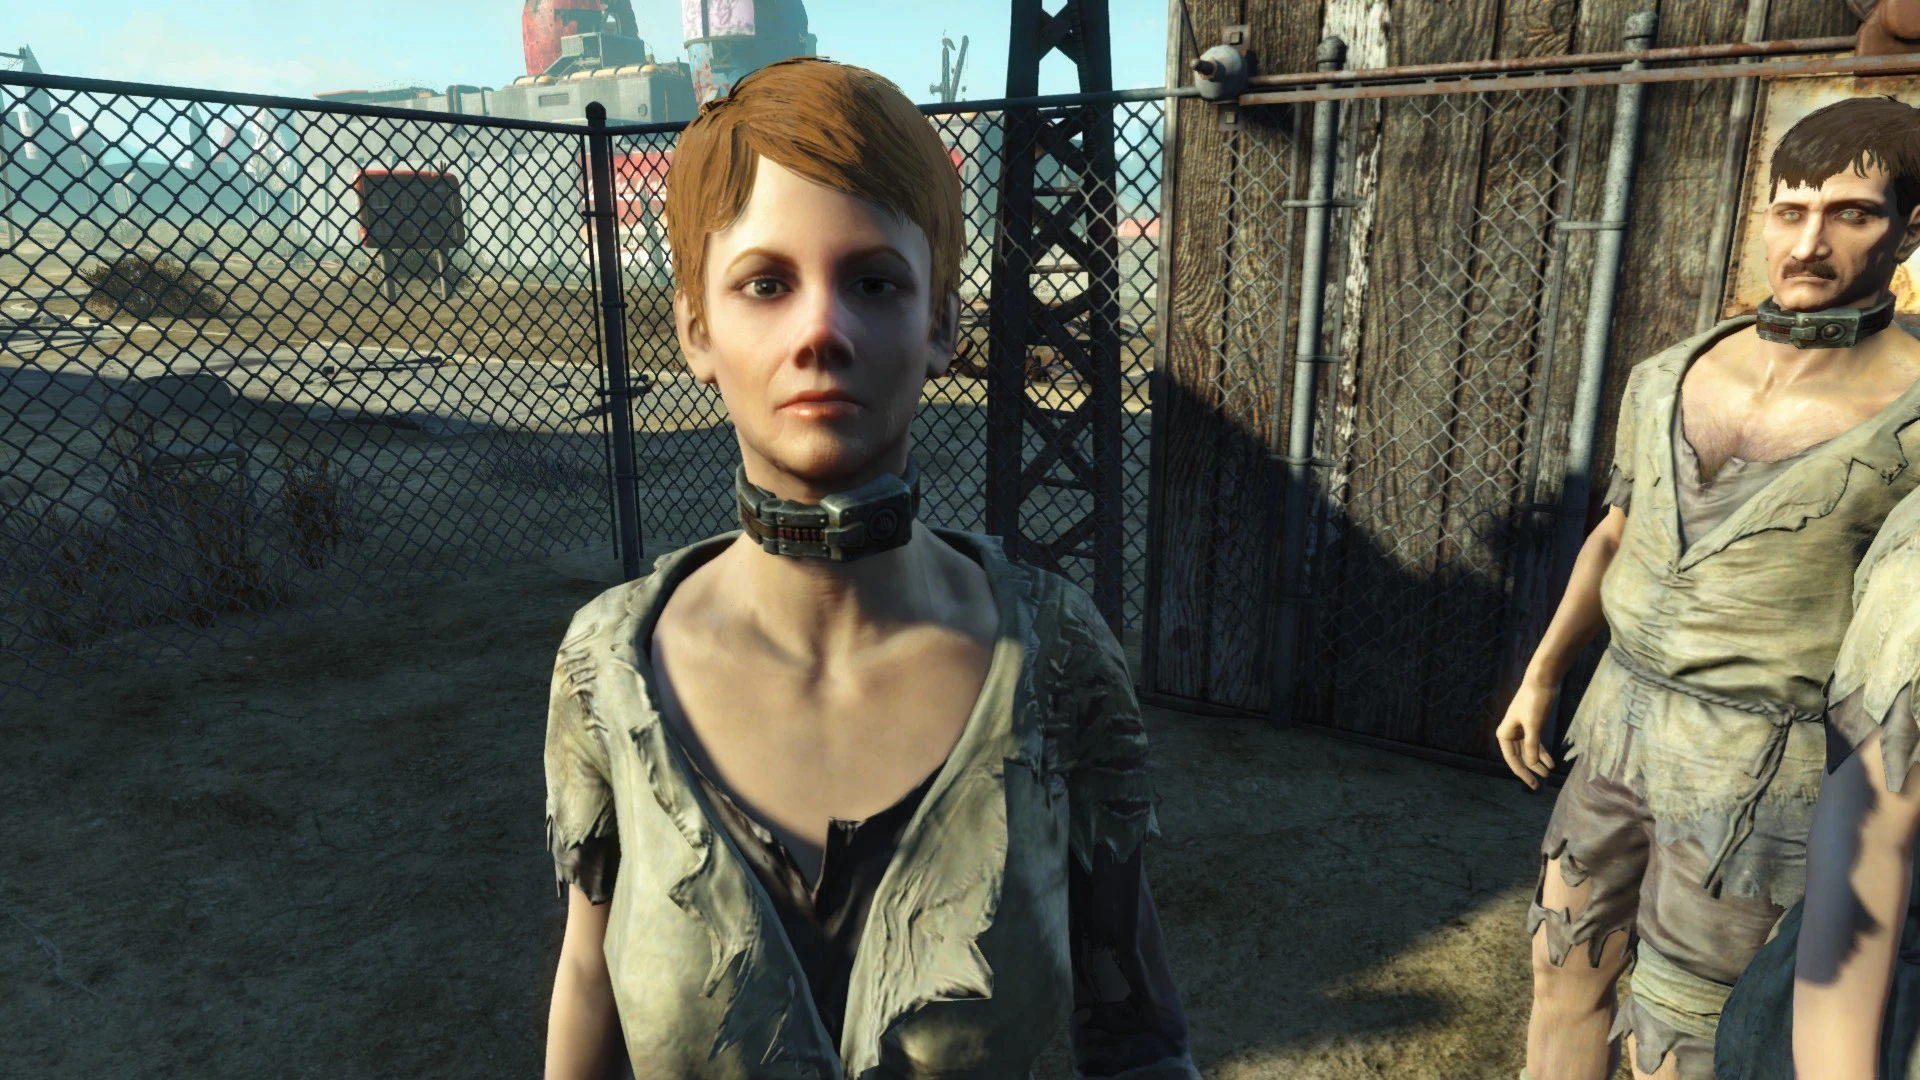 Buy A Slave And Slave Collar Explosion Mod At Fallout 4 Nexus Mods And Community